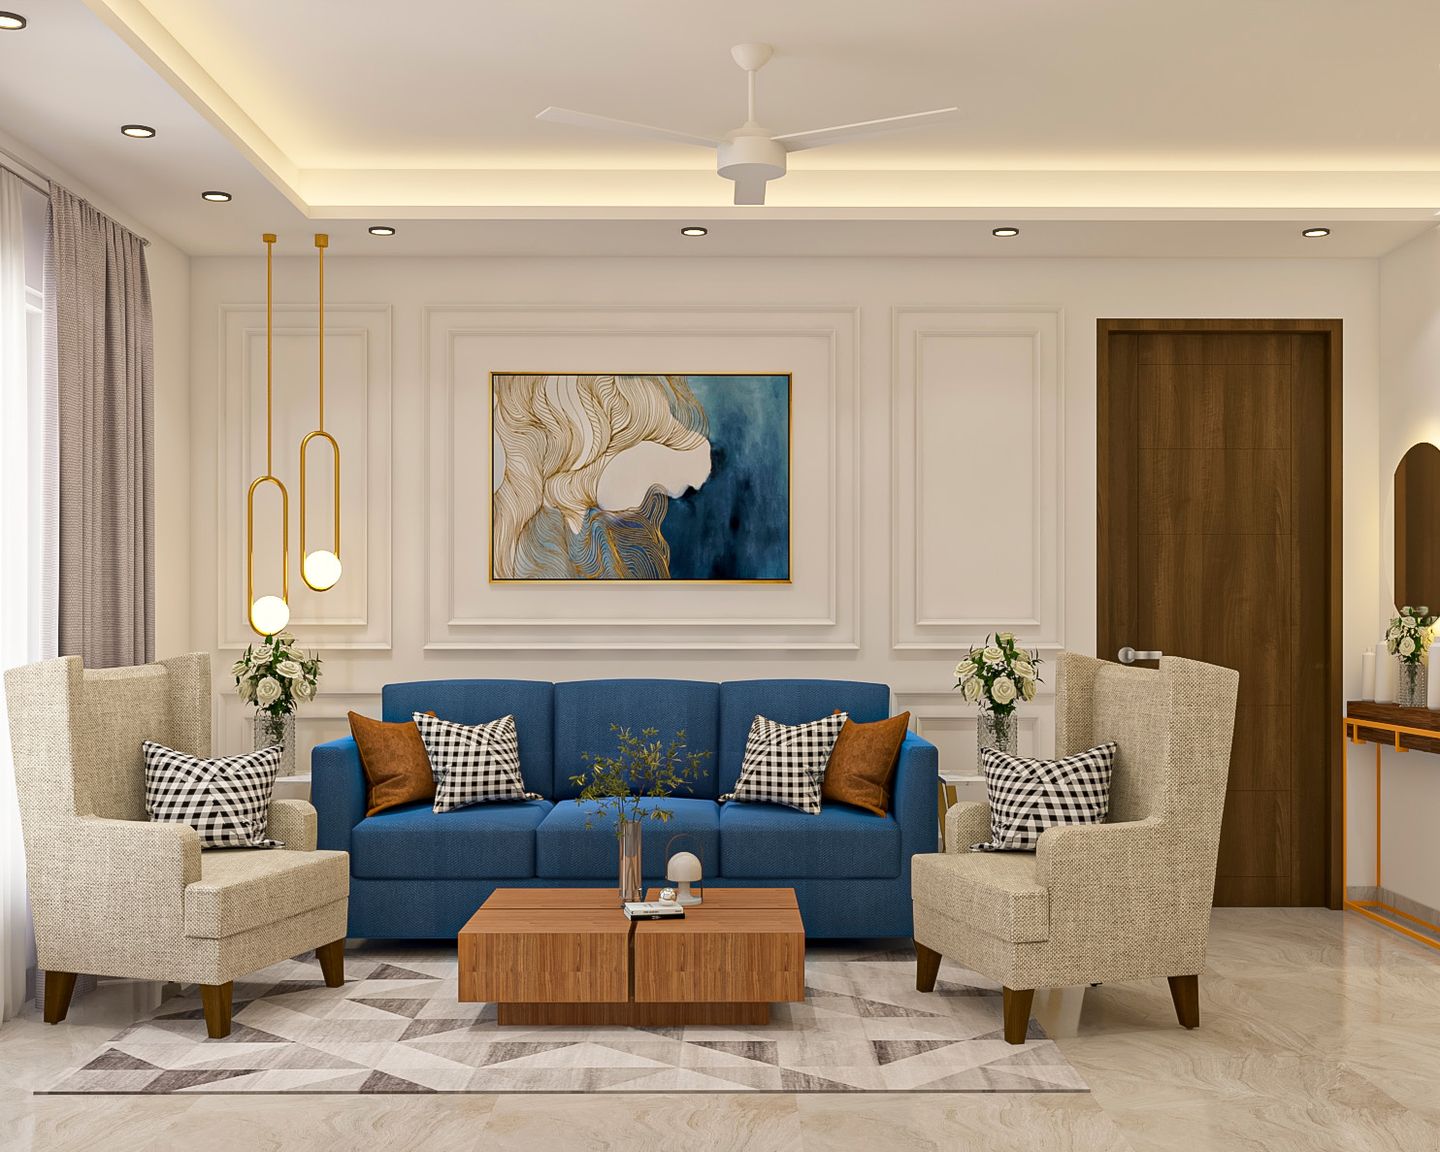 Living Room Design With Blue Sofa And Beige Accent Chairs - Livspace